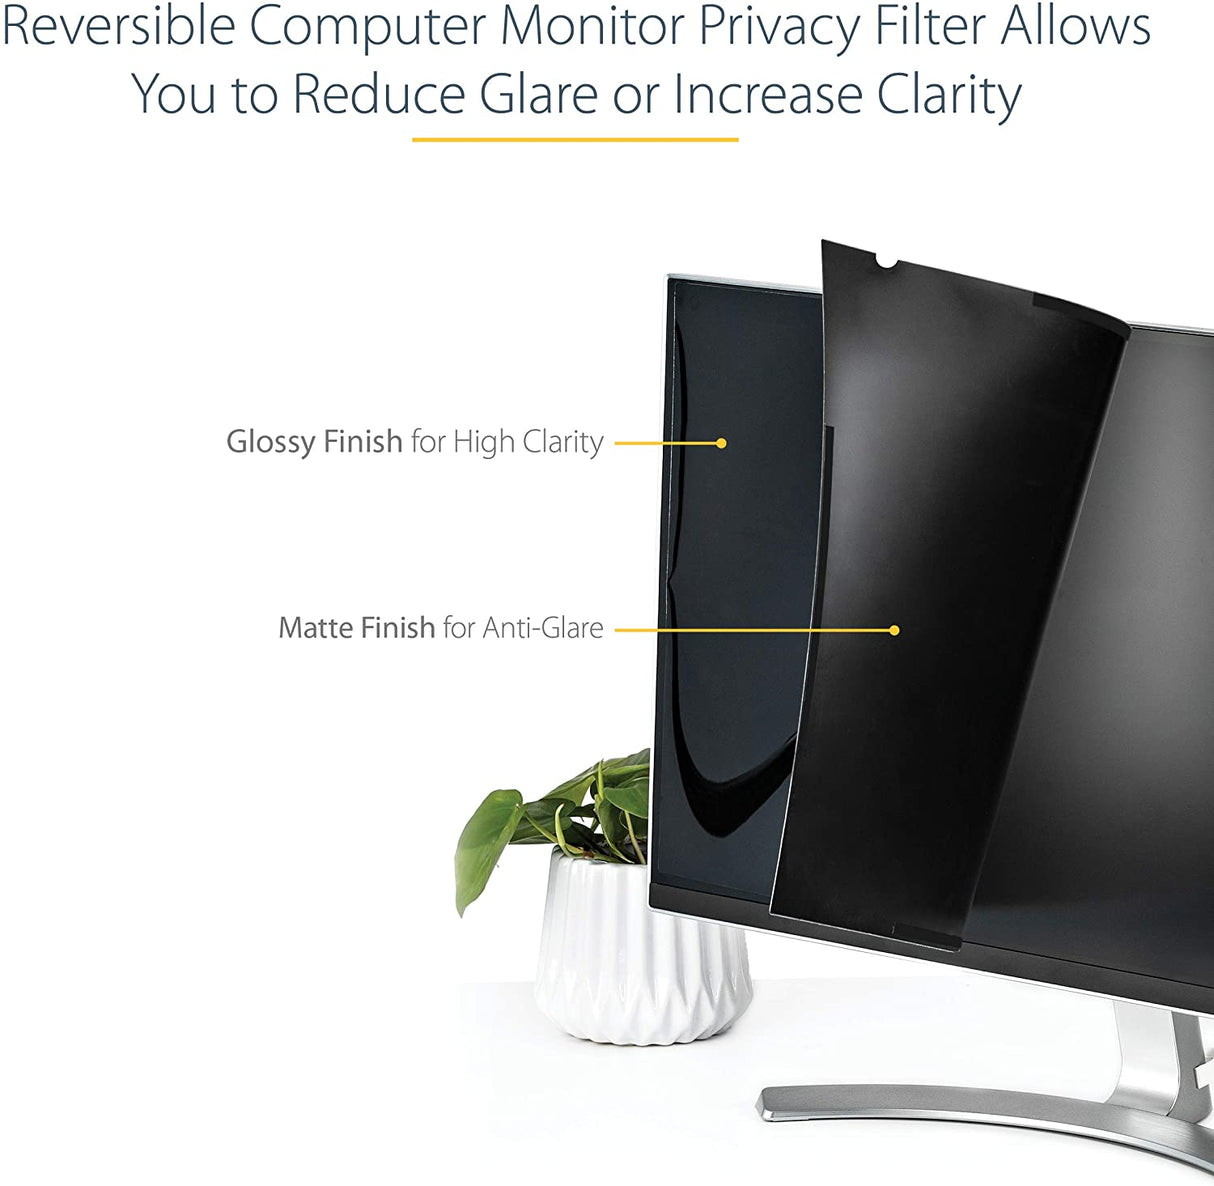 StarTech.com Monitor Privacy Screen for 23" Display - Computer Screen Security Filter - Blue Light Reducing Screen Protector Film - 16:9 Widescreen - Matte/Glossy - +/-30 Degree (PRIVACY-SCREEN-23M)